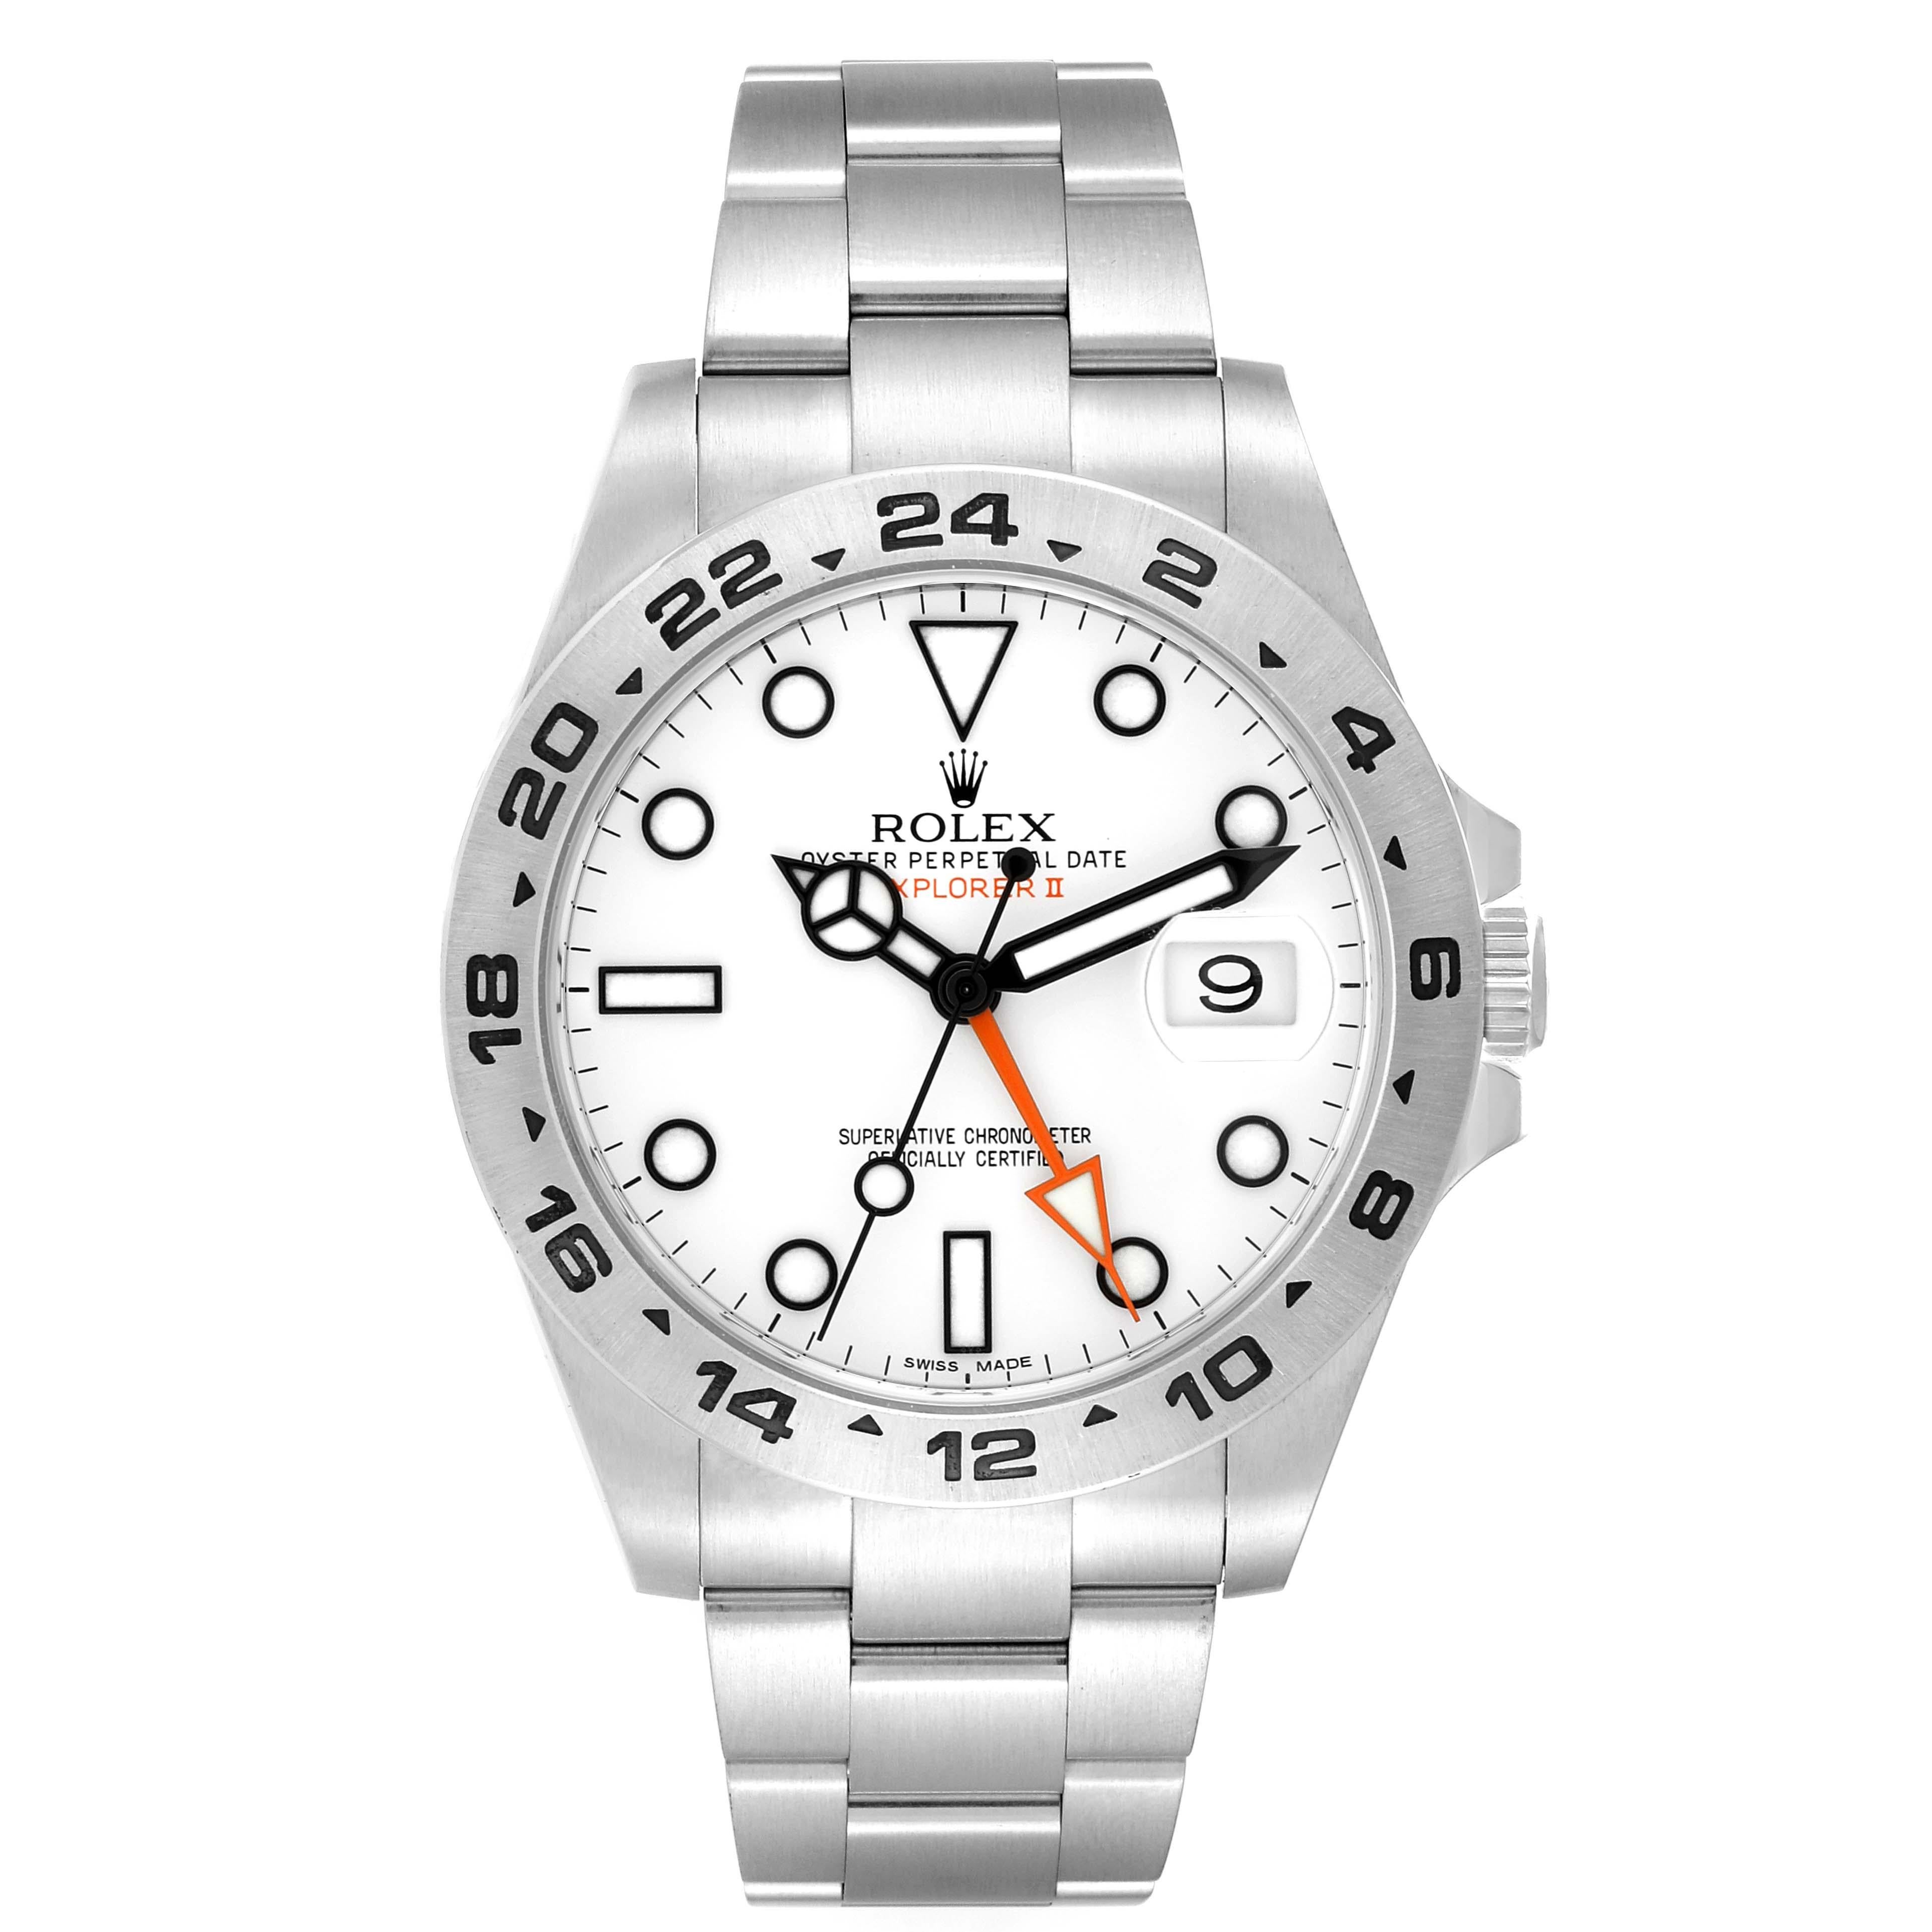 Rolex Explorer II White Dial Orange Hand Steel Mens Watch 216570 Box Card. Officially certified chronometer automatic self-winding movement. Stainless steel case 42.0 mm in diameter. Rolex logo on the crown. Stainless steel bezel with engraved